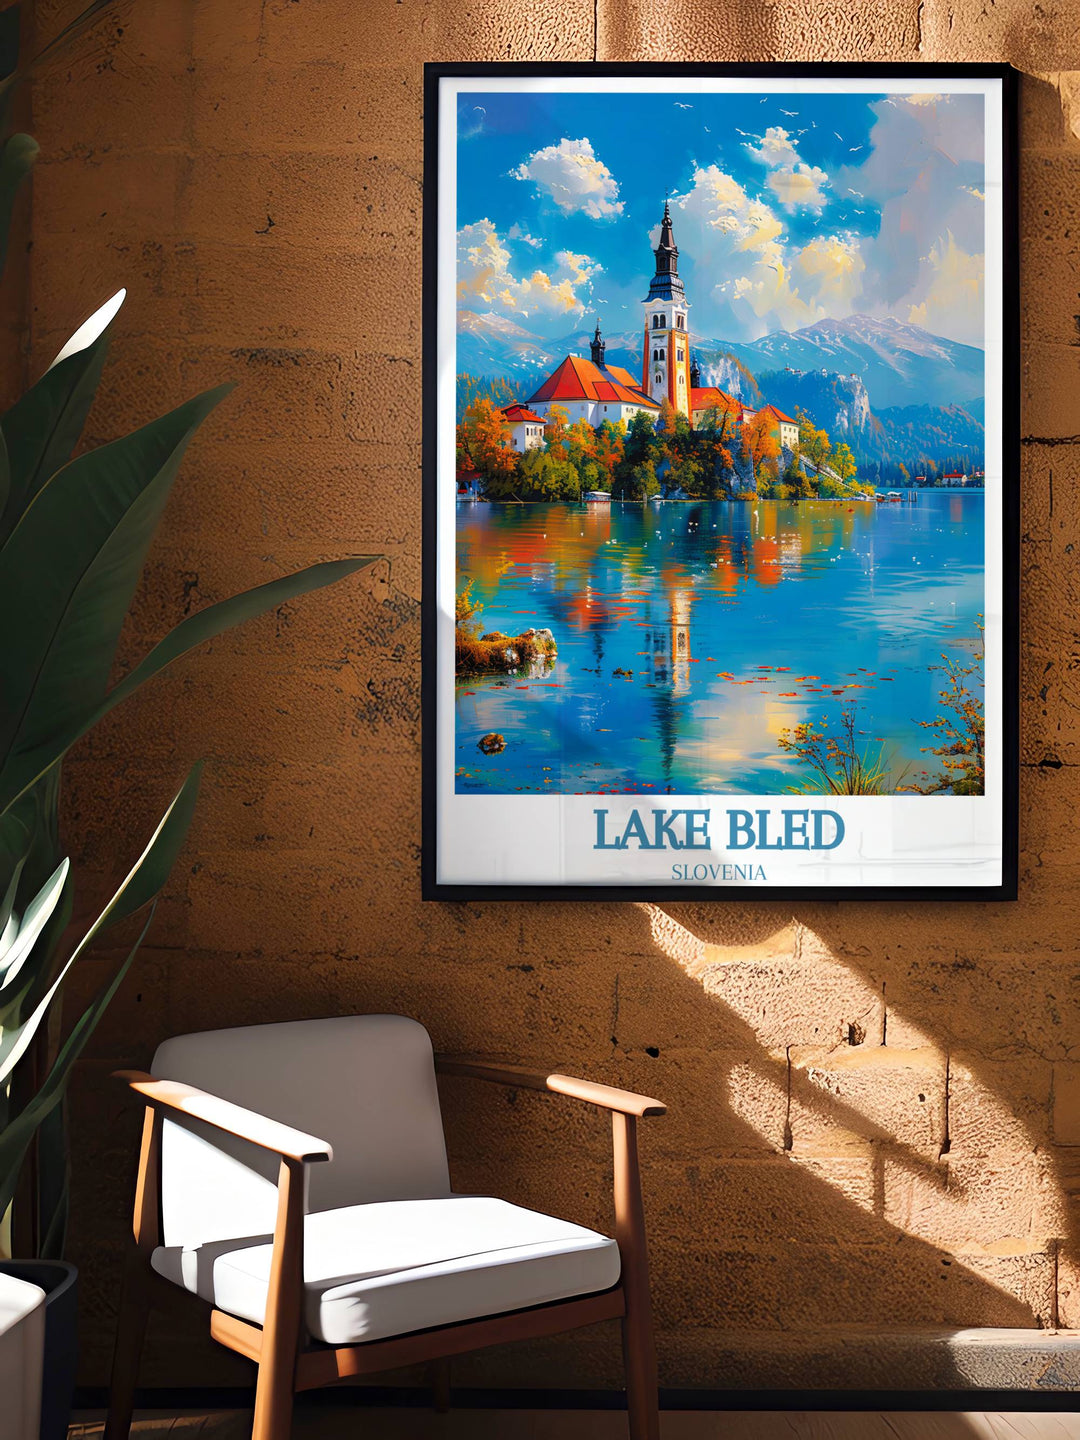 Elegant and serene Lake Bled Artwork focusing on the calm waters and distant hills perfect as a housewarming gift or personal keepsake